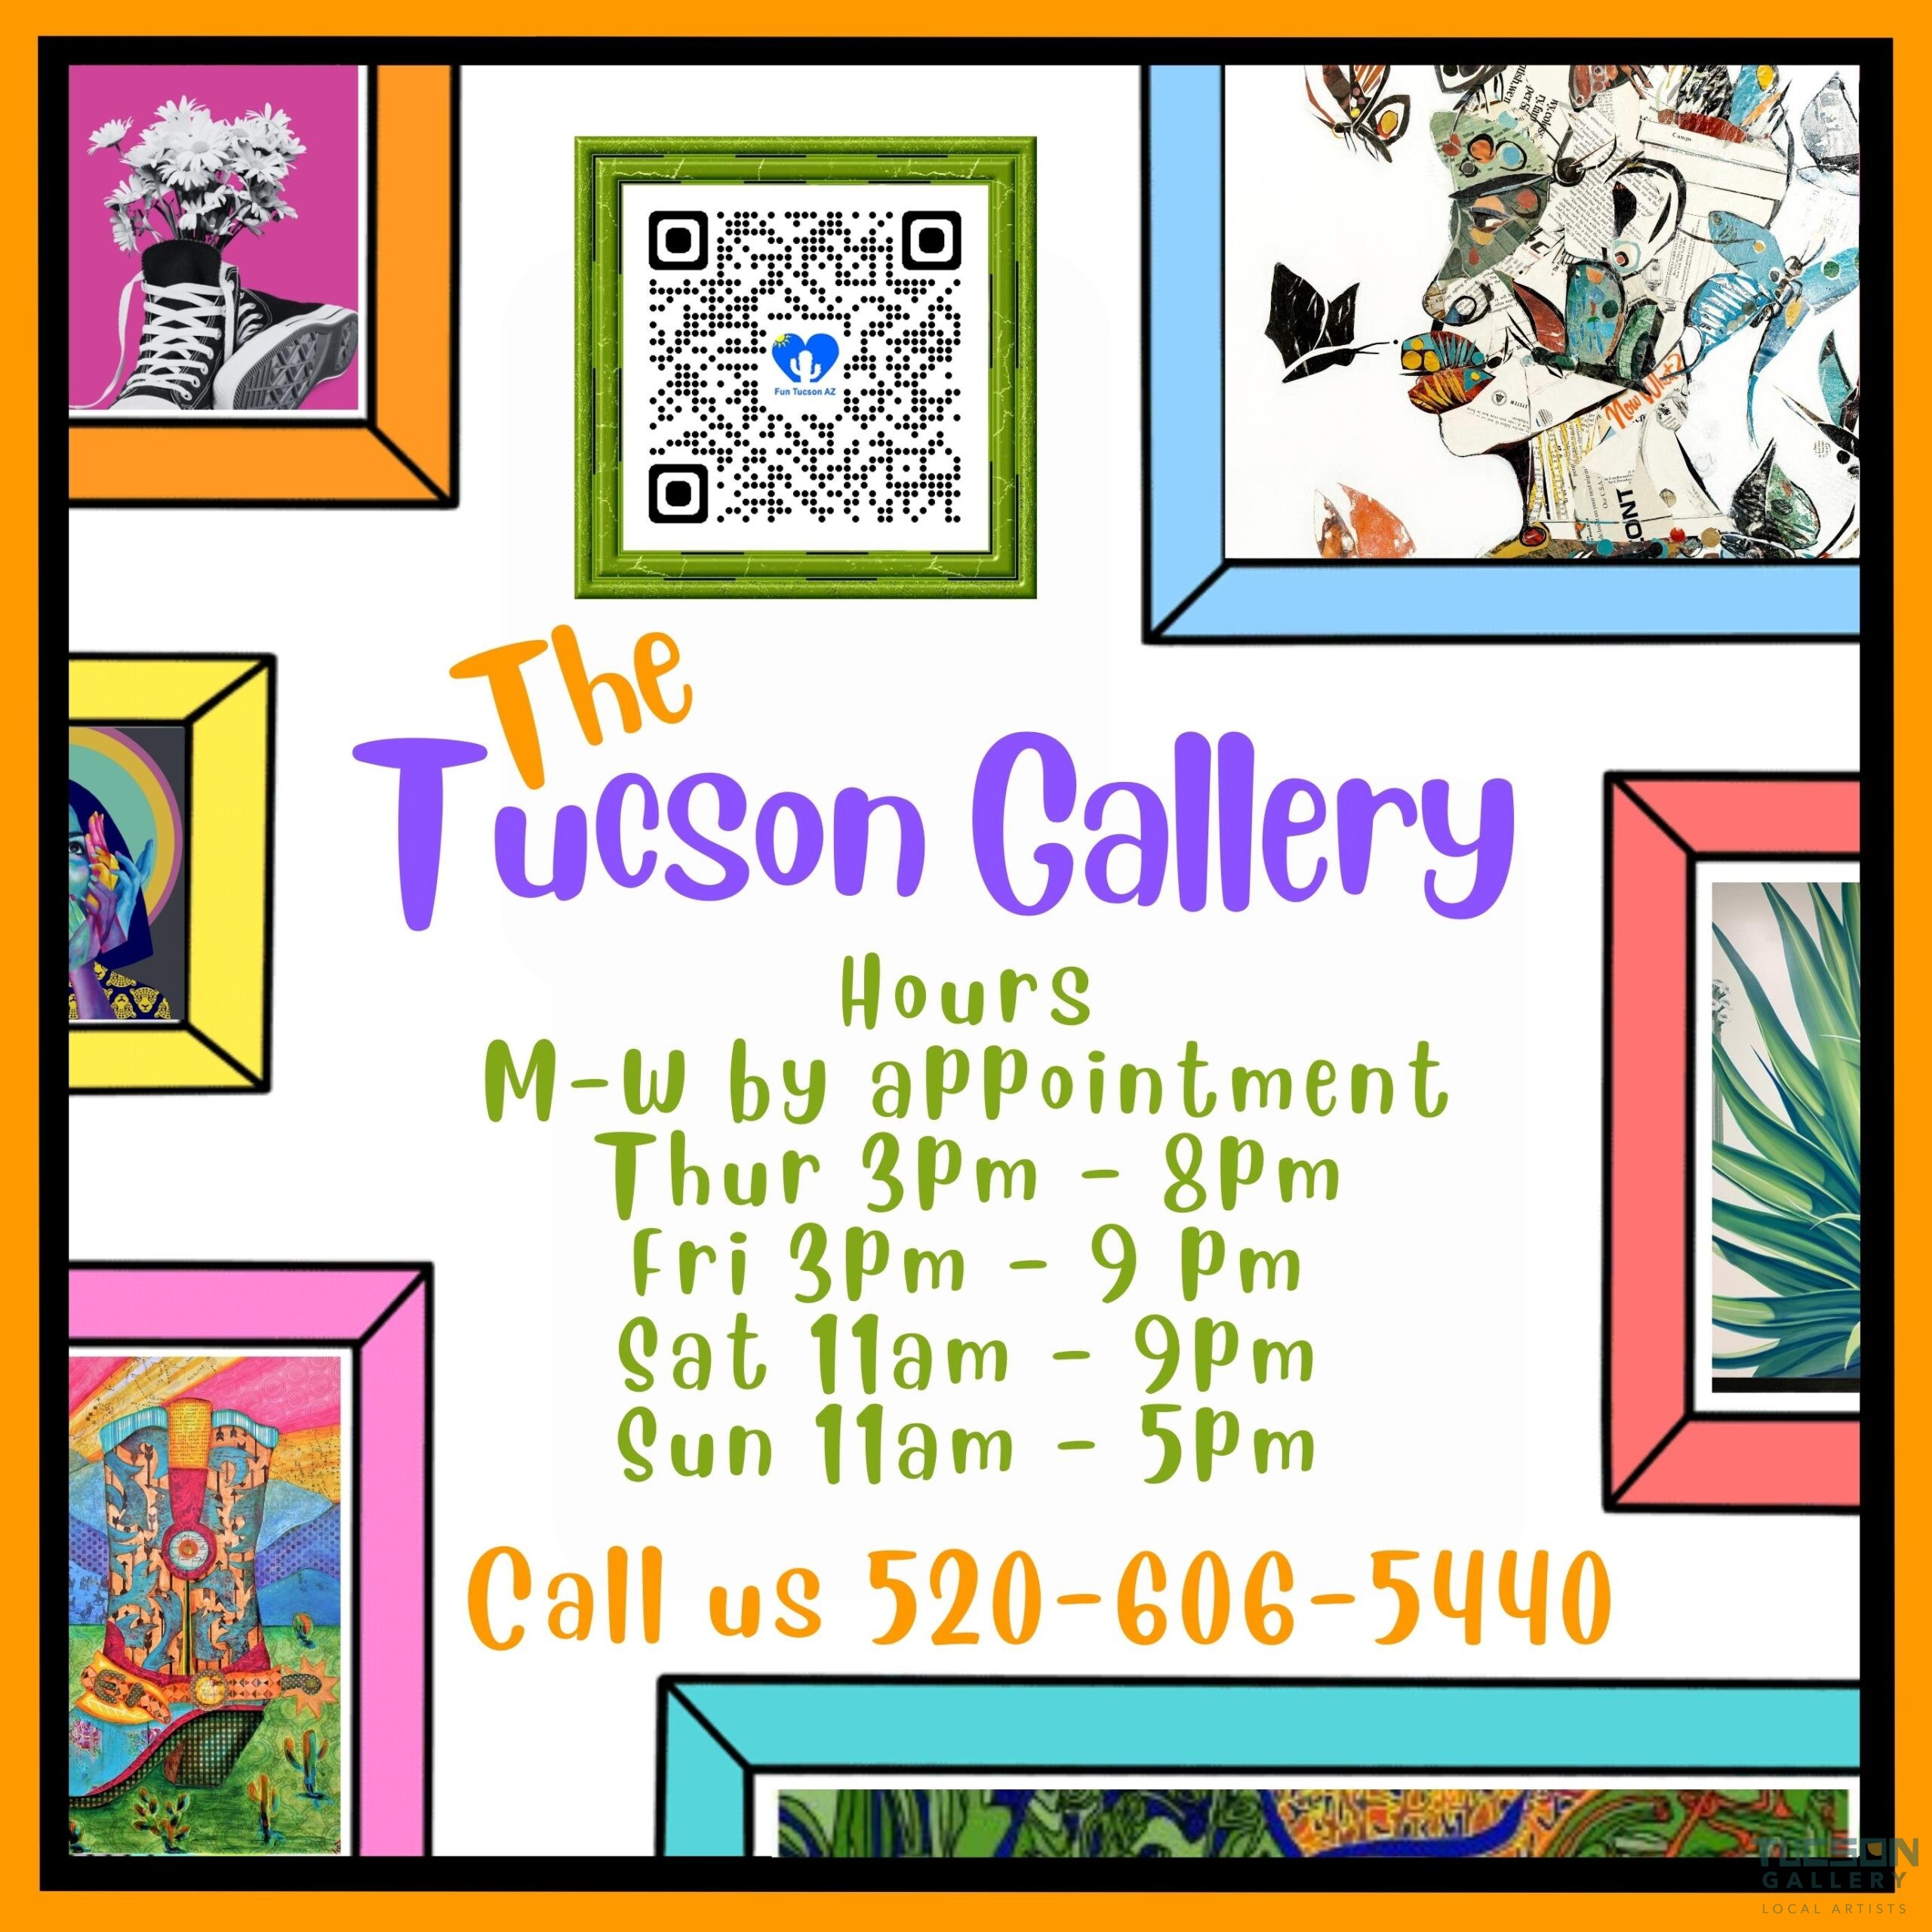 Graphic showing Tucson Gallery hours